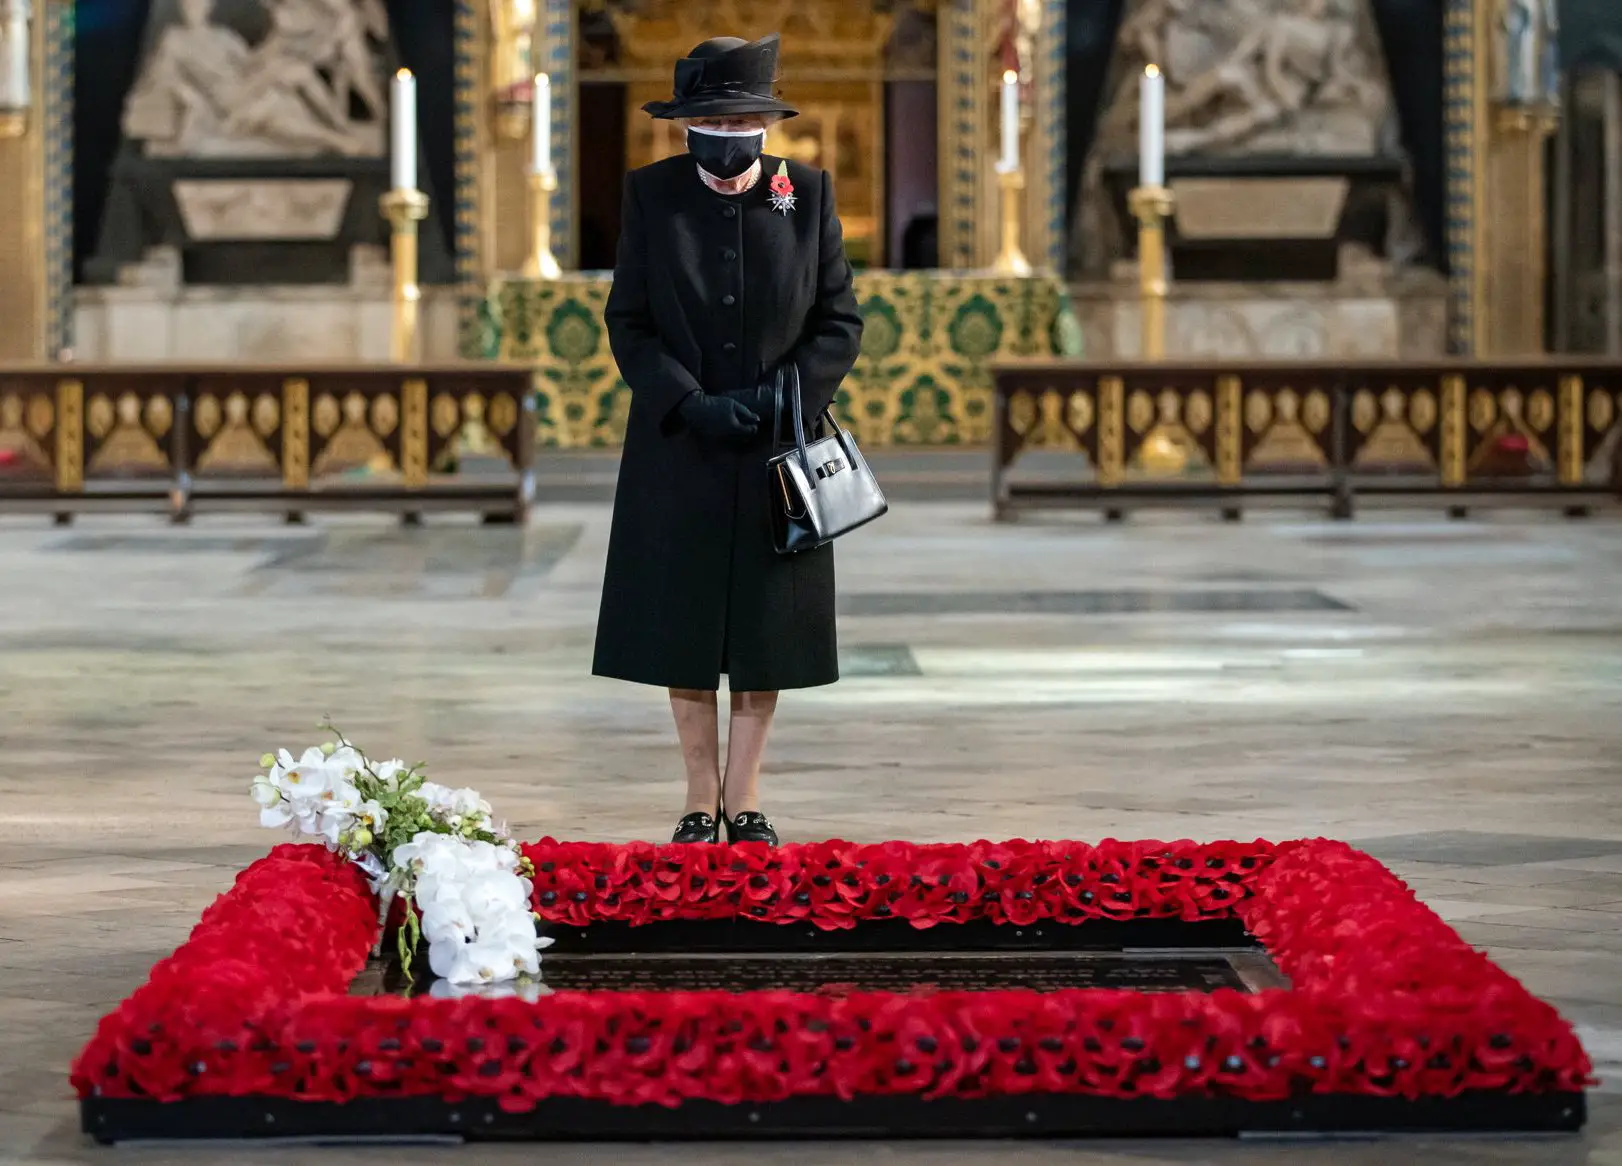 Her Majesty the Queen made a private visit to Westminster Abbey ahead of Remembrance Sunday